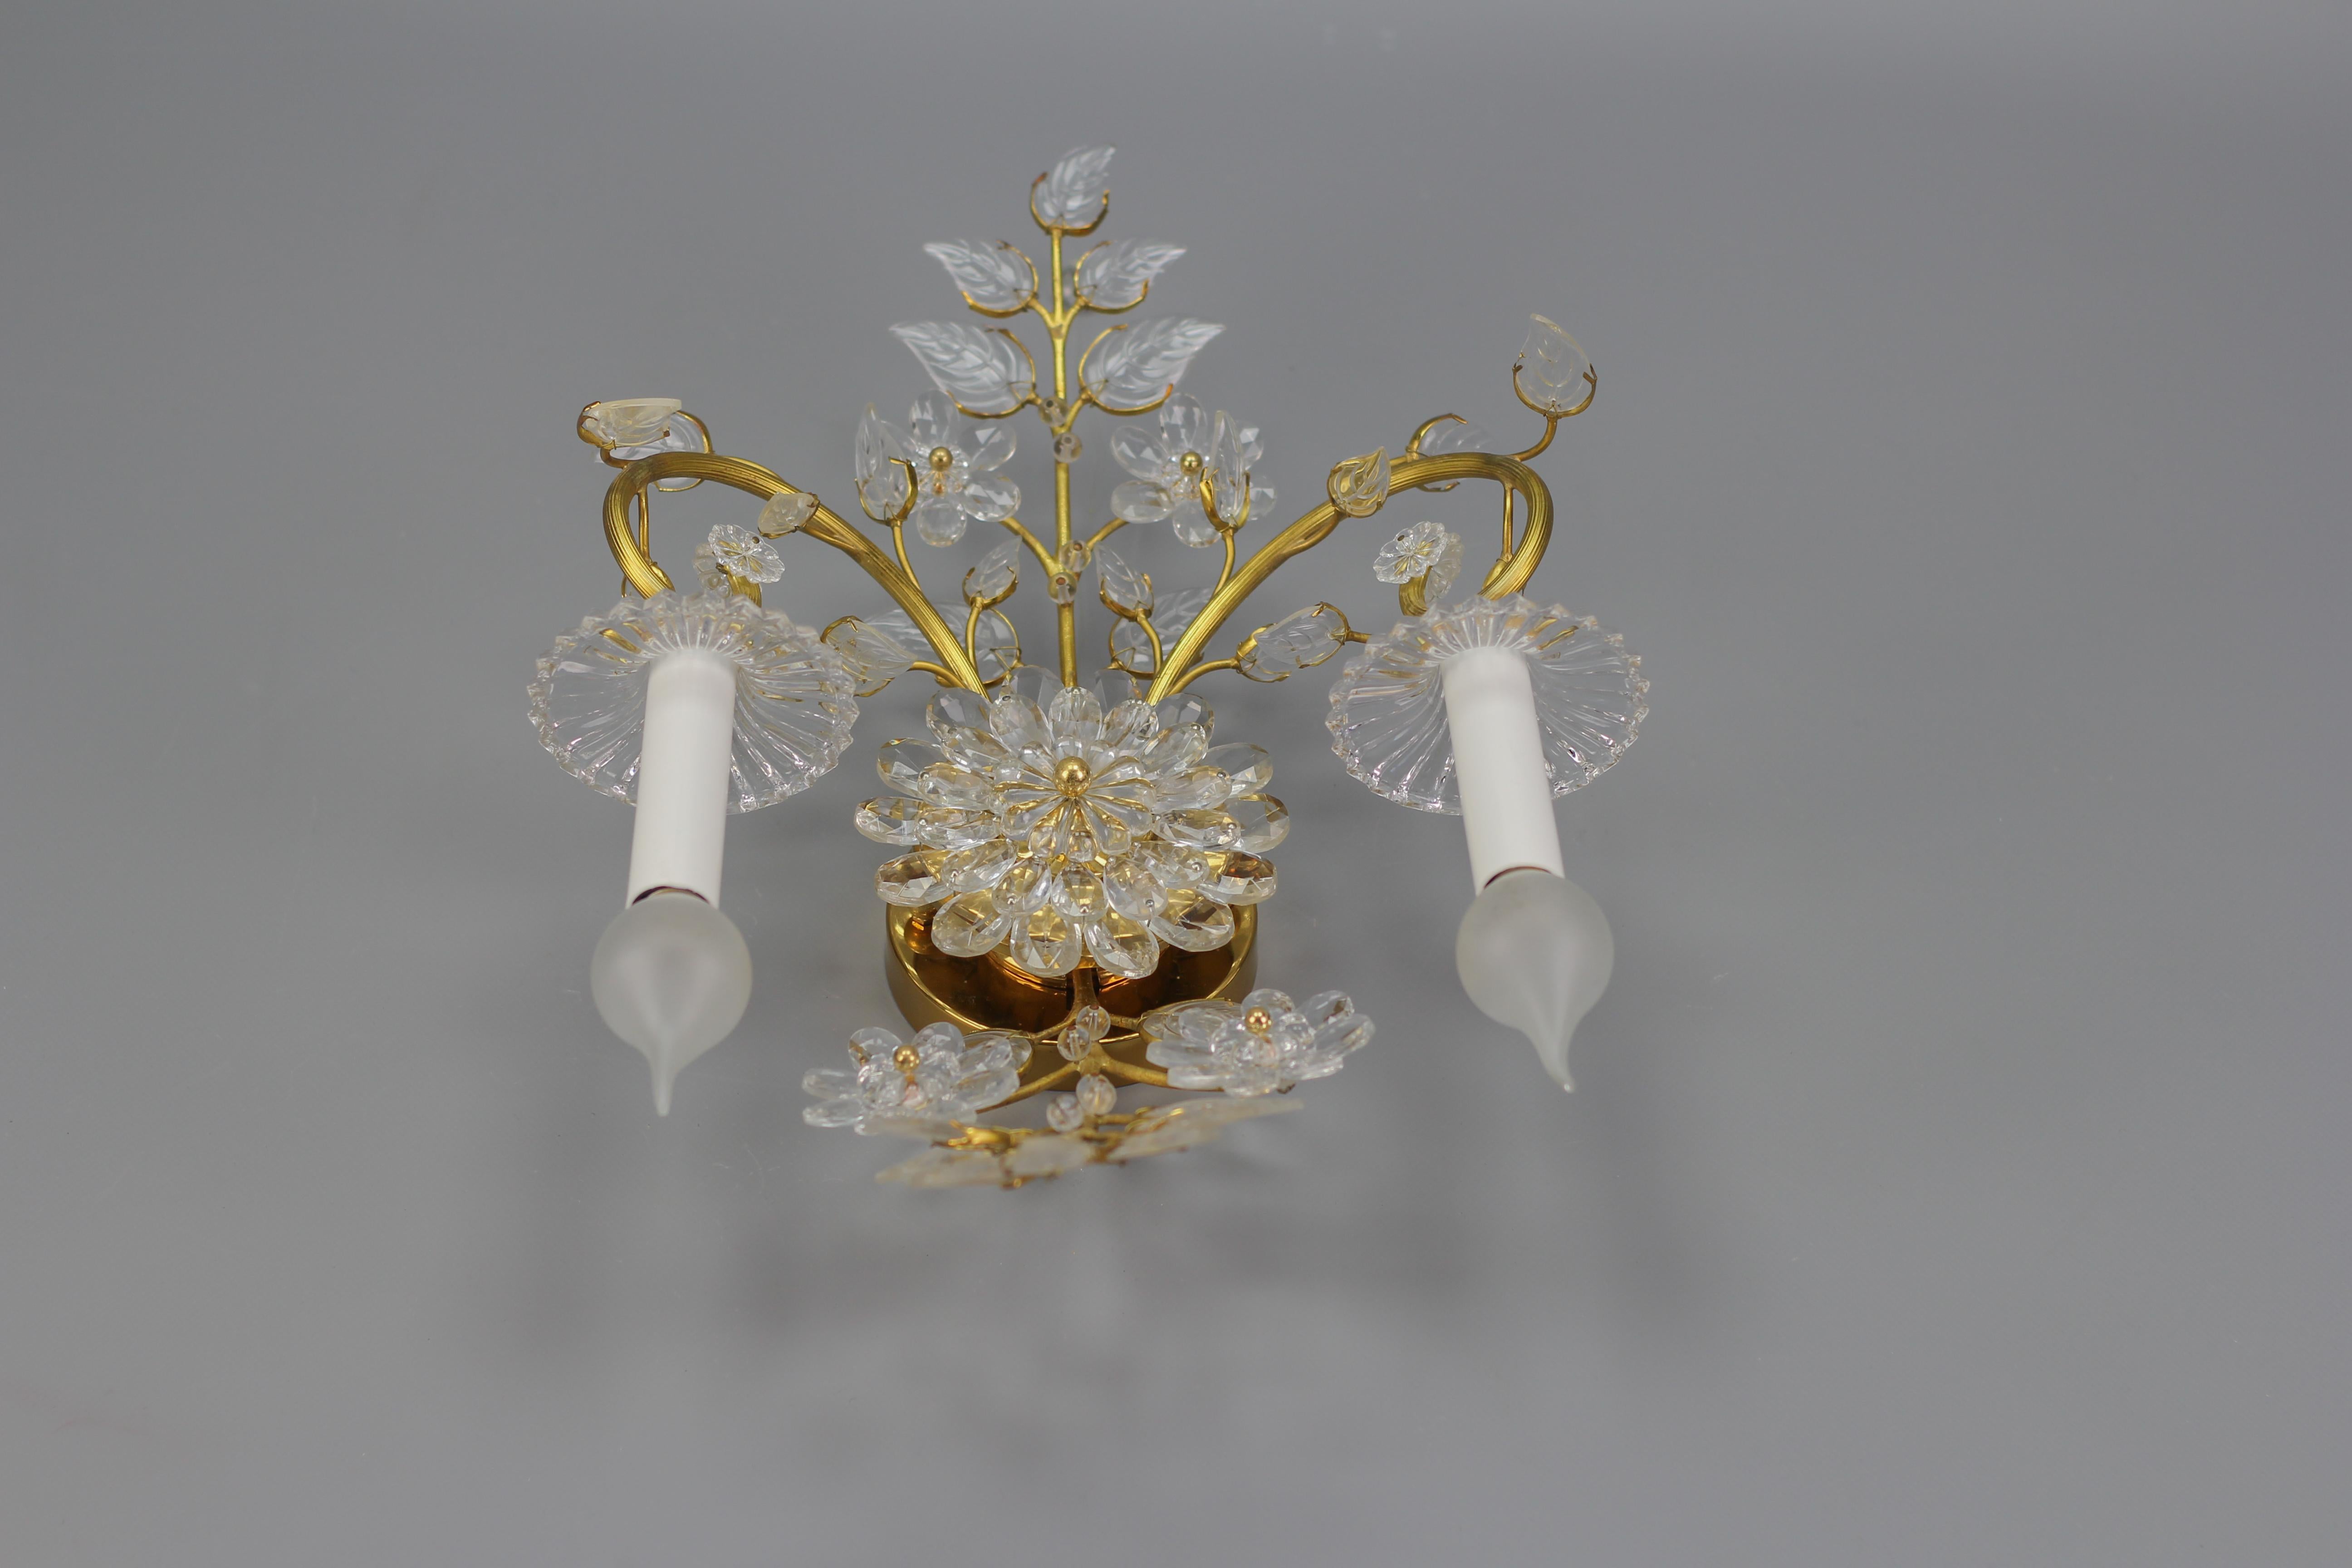 Palme & Walter Crystal and Brass Floral Wall Sconce by Palwa, Germany, 1960s For Sale 2